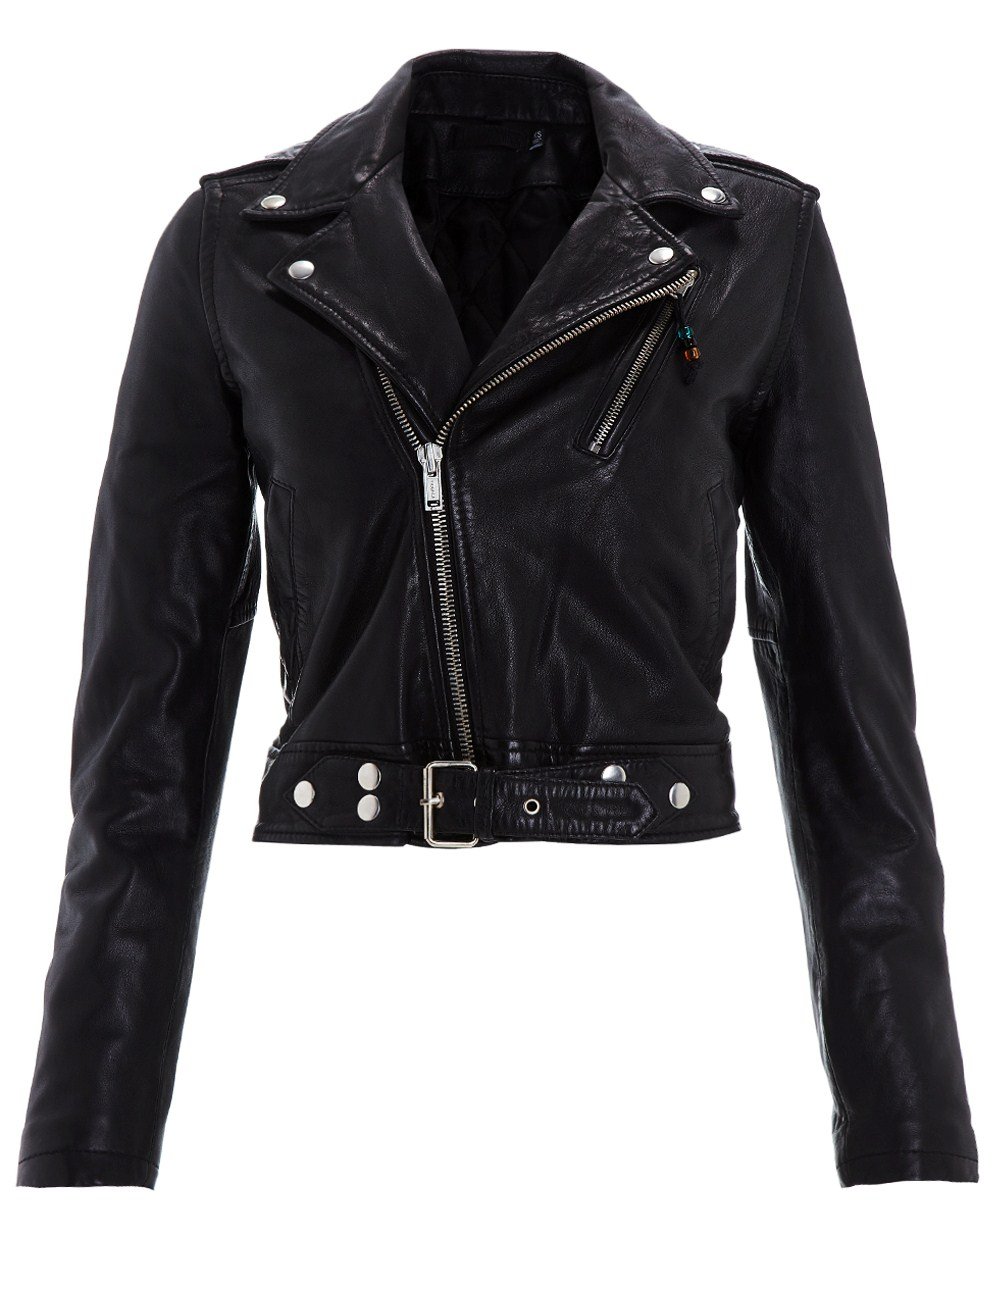 Blk dnm Black Cropped Leather Jacket 1 in Black | Lyst